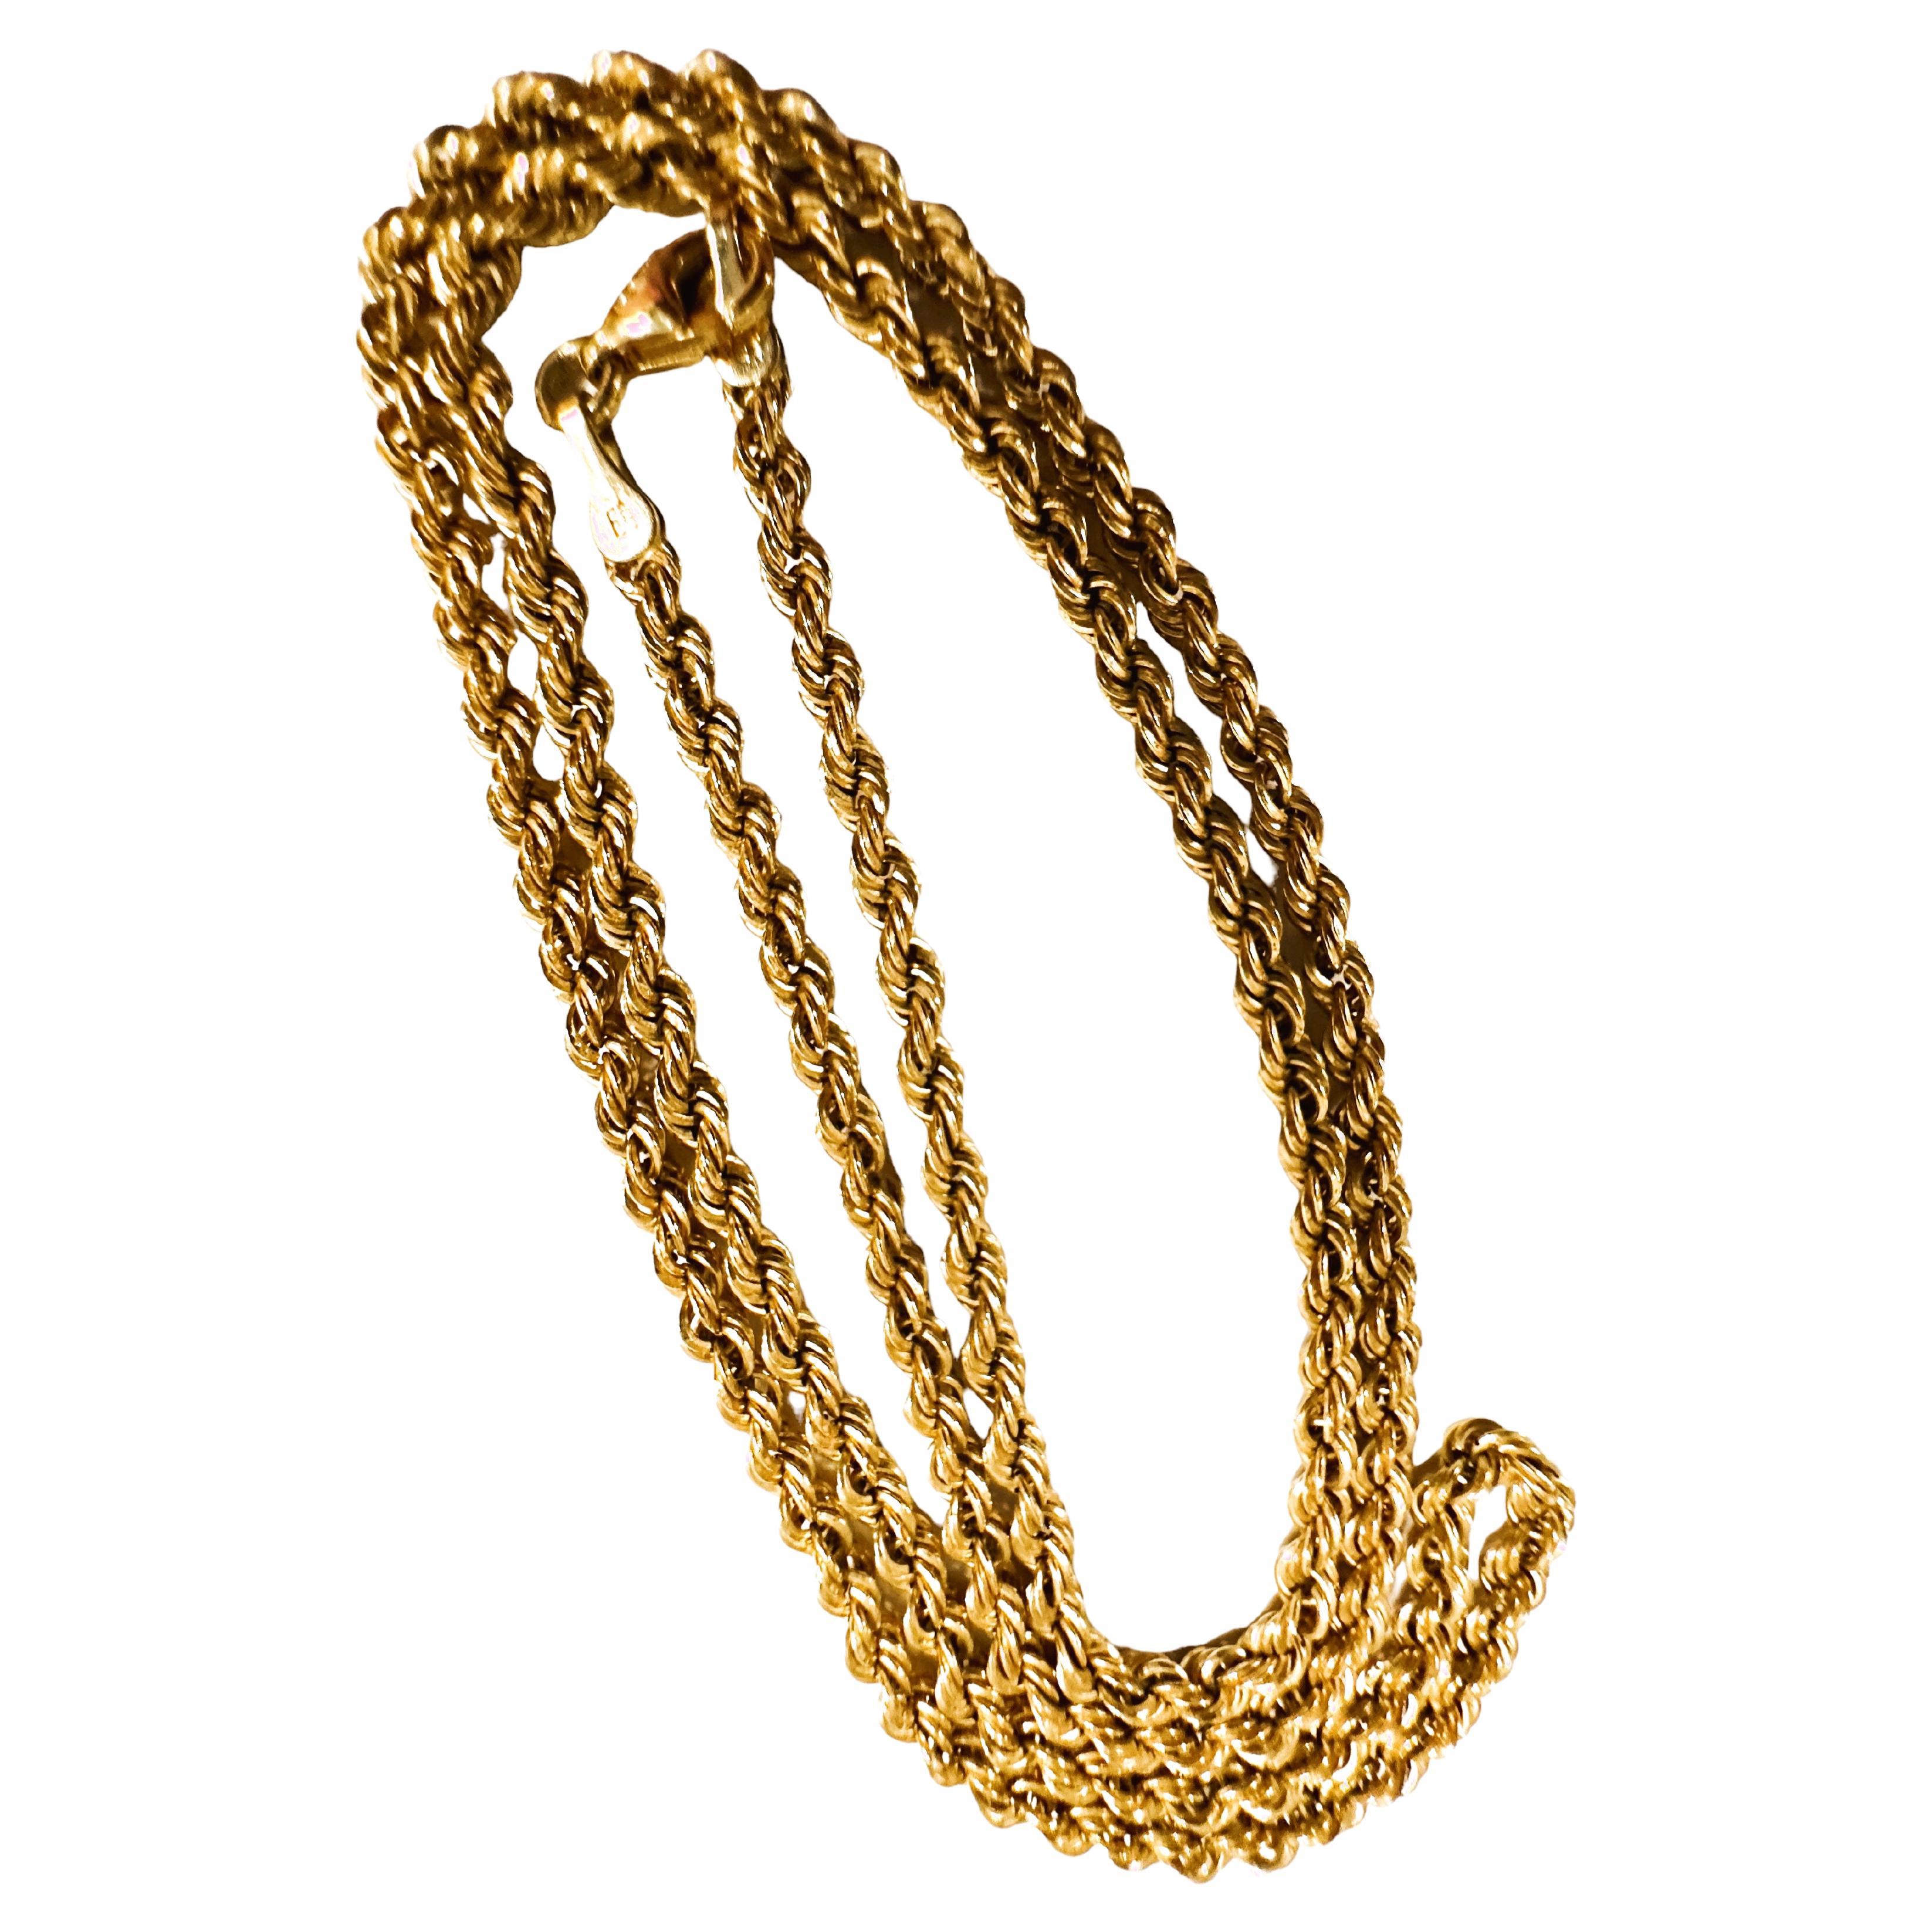 18K Yellow Gold Italian Milor Rope Chain 20 Inches 4.34 Grams